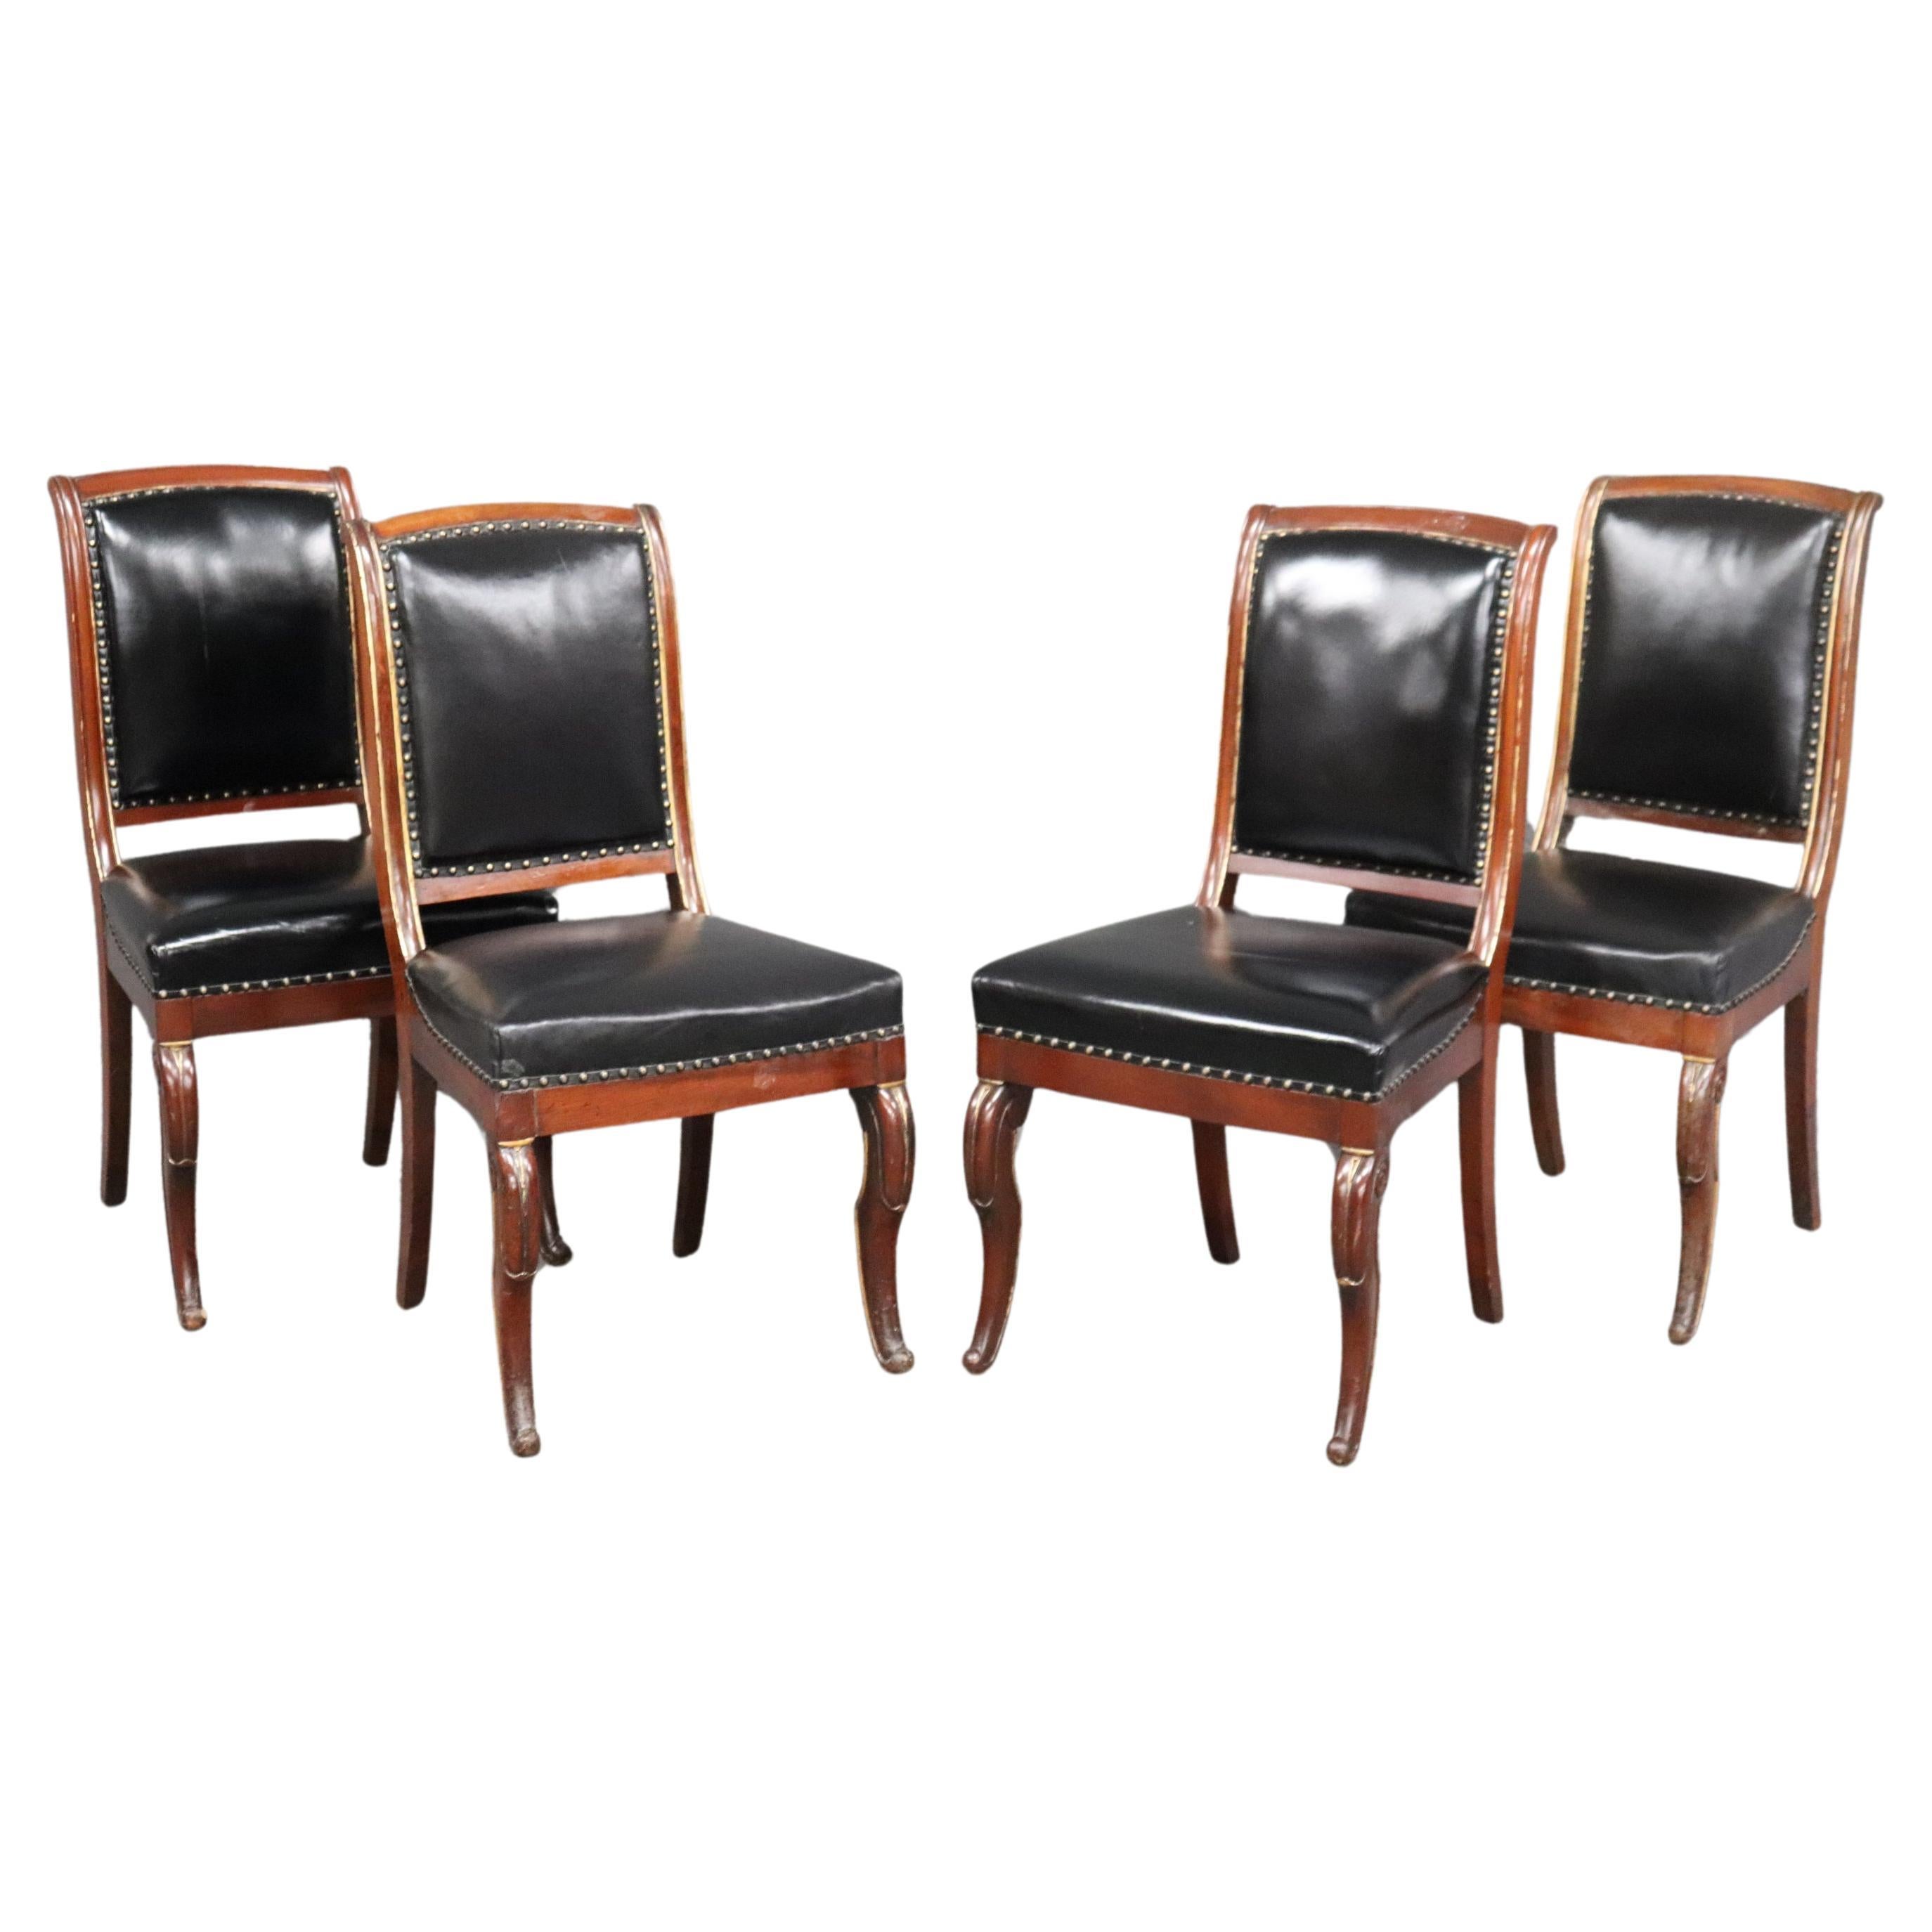  Four Late 19th Century Regency Dining Chairs By Jean Selme For Maison Jansen For Sale